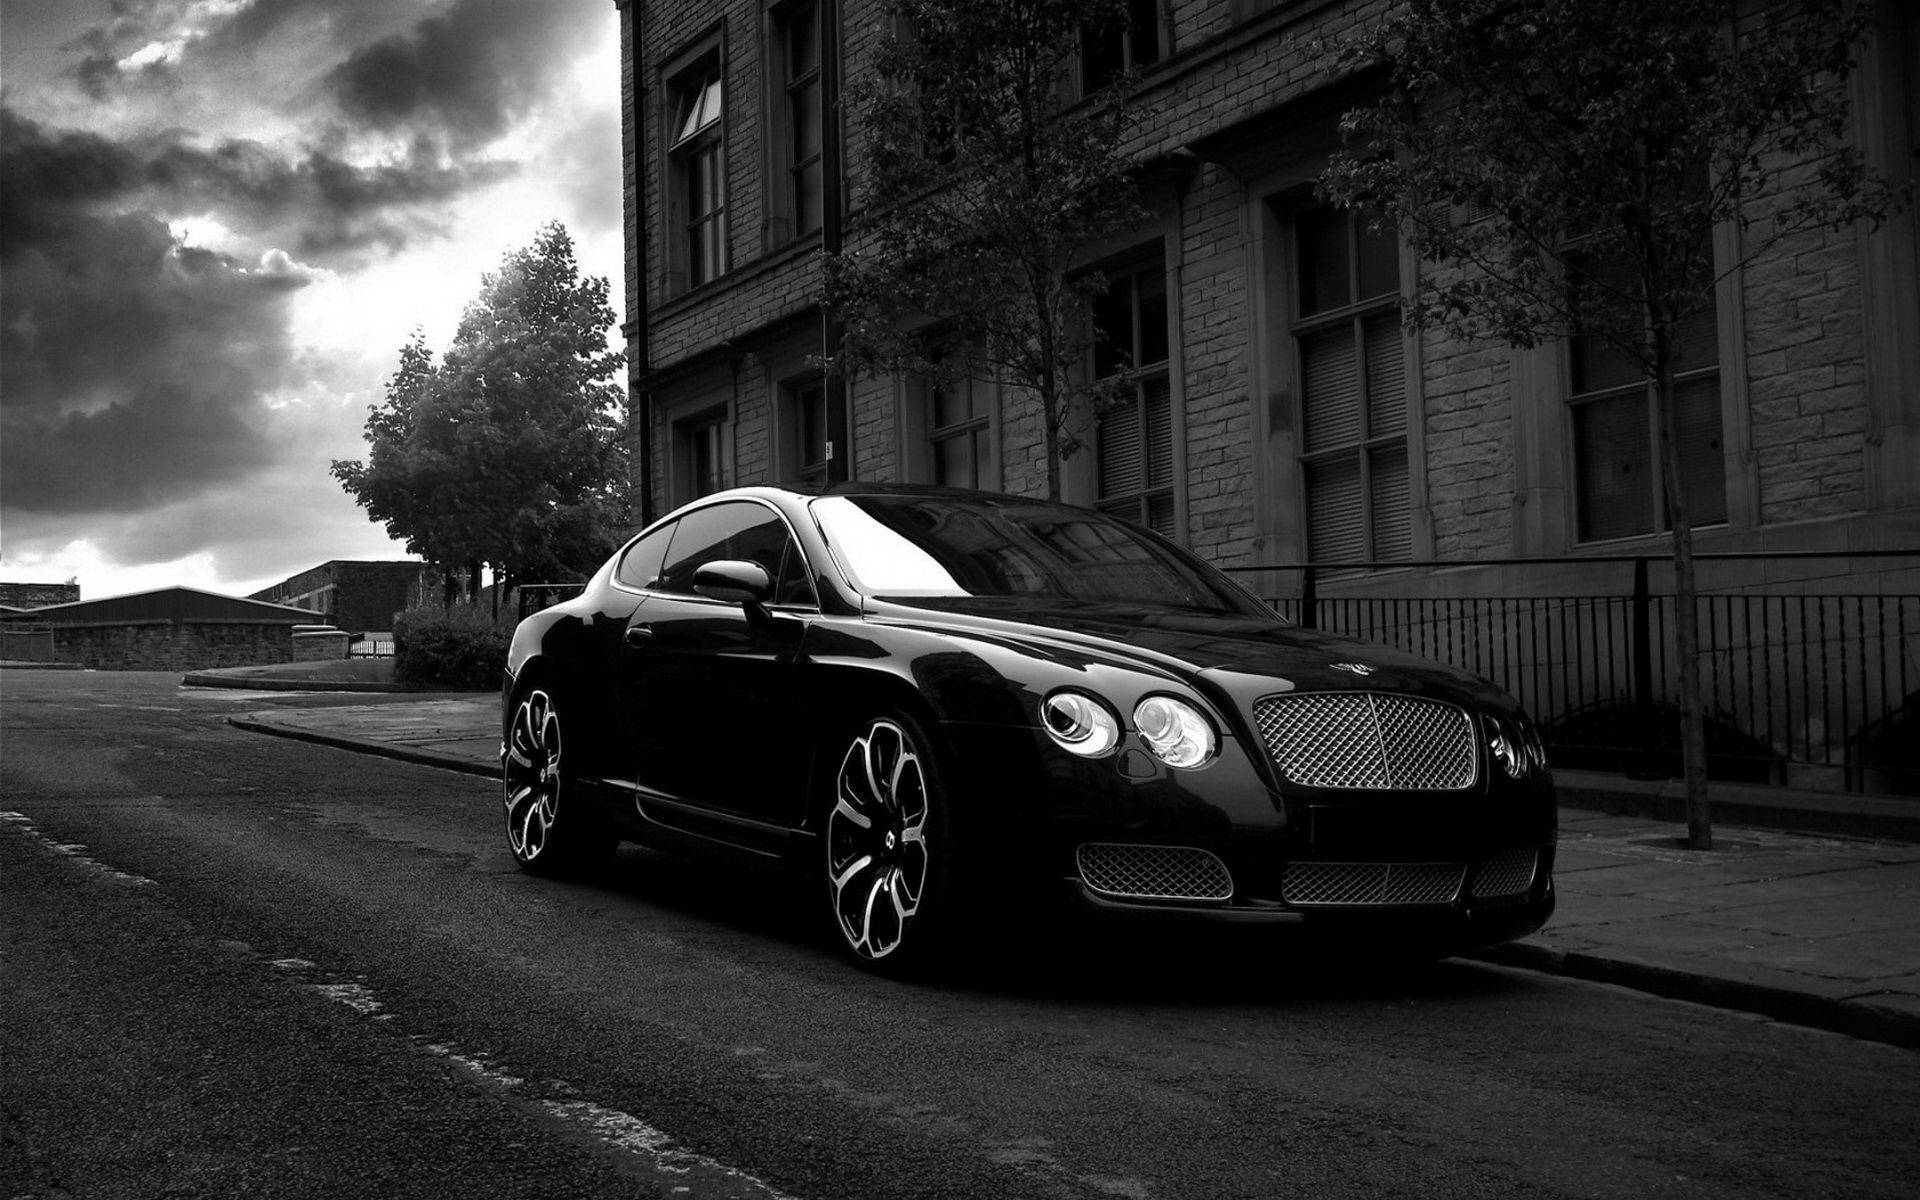 Luxurious and High Performance: Bentley Continental GT Wallpaper